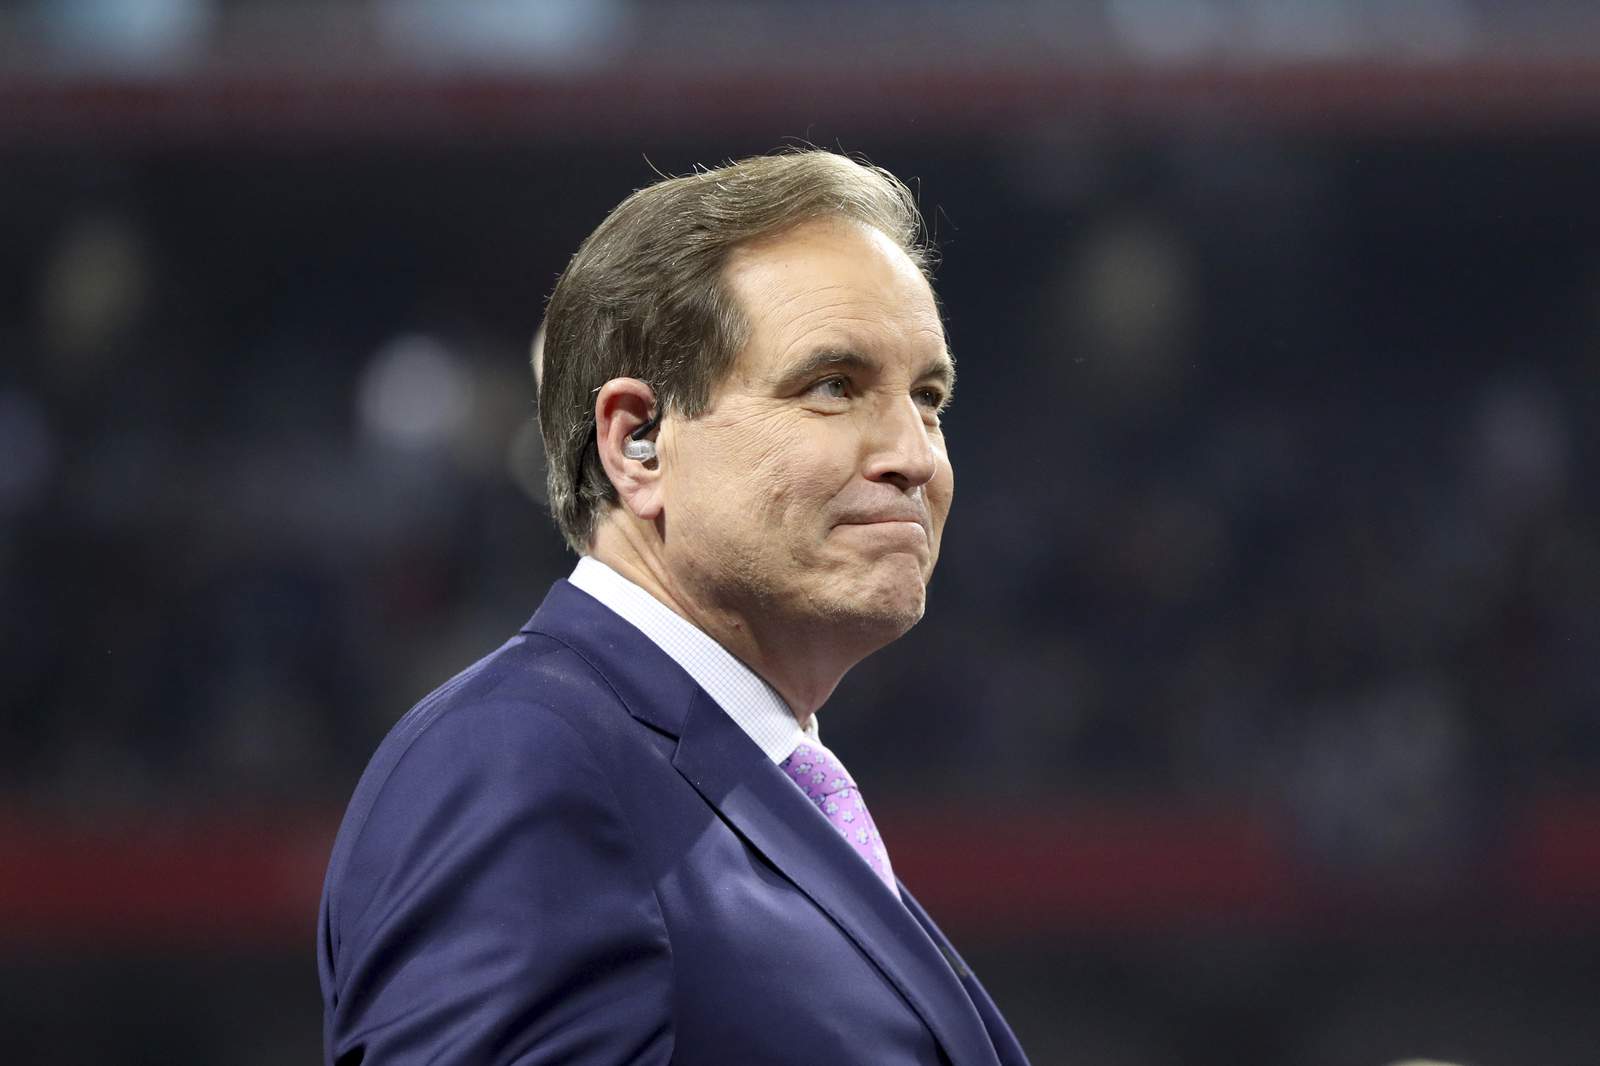 'Hello, friends': Nantz agrees to remain with CBS Sports